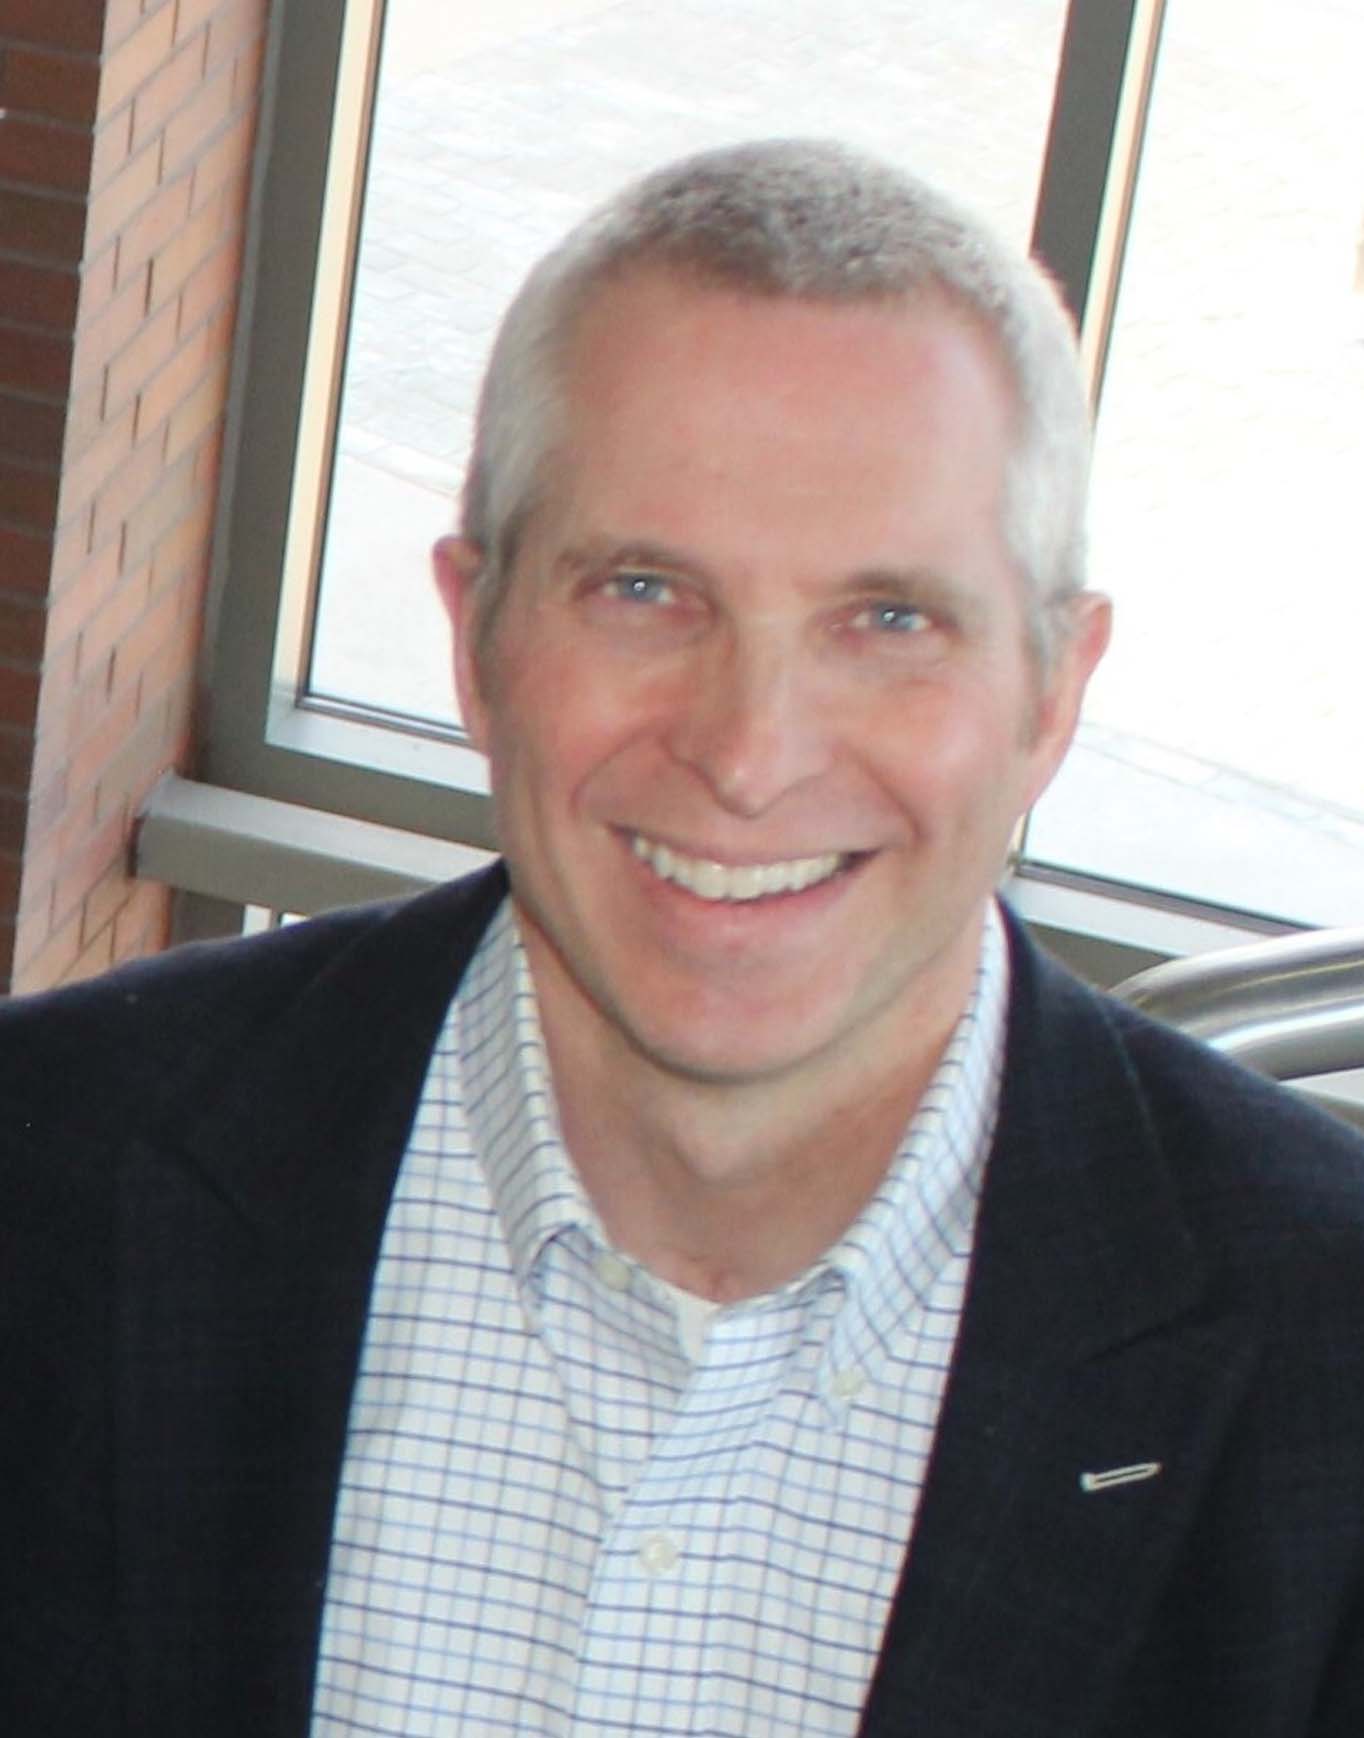 Todd Ericksrud, President and CEO at MatchBack Systems